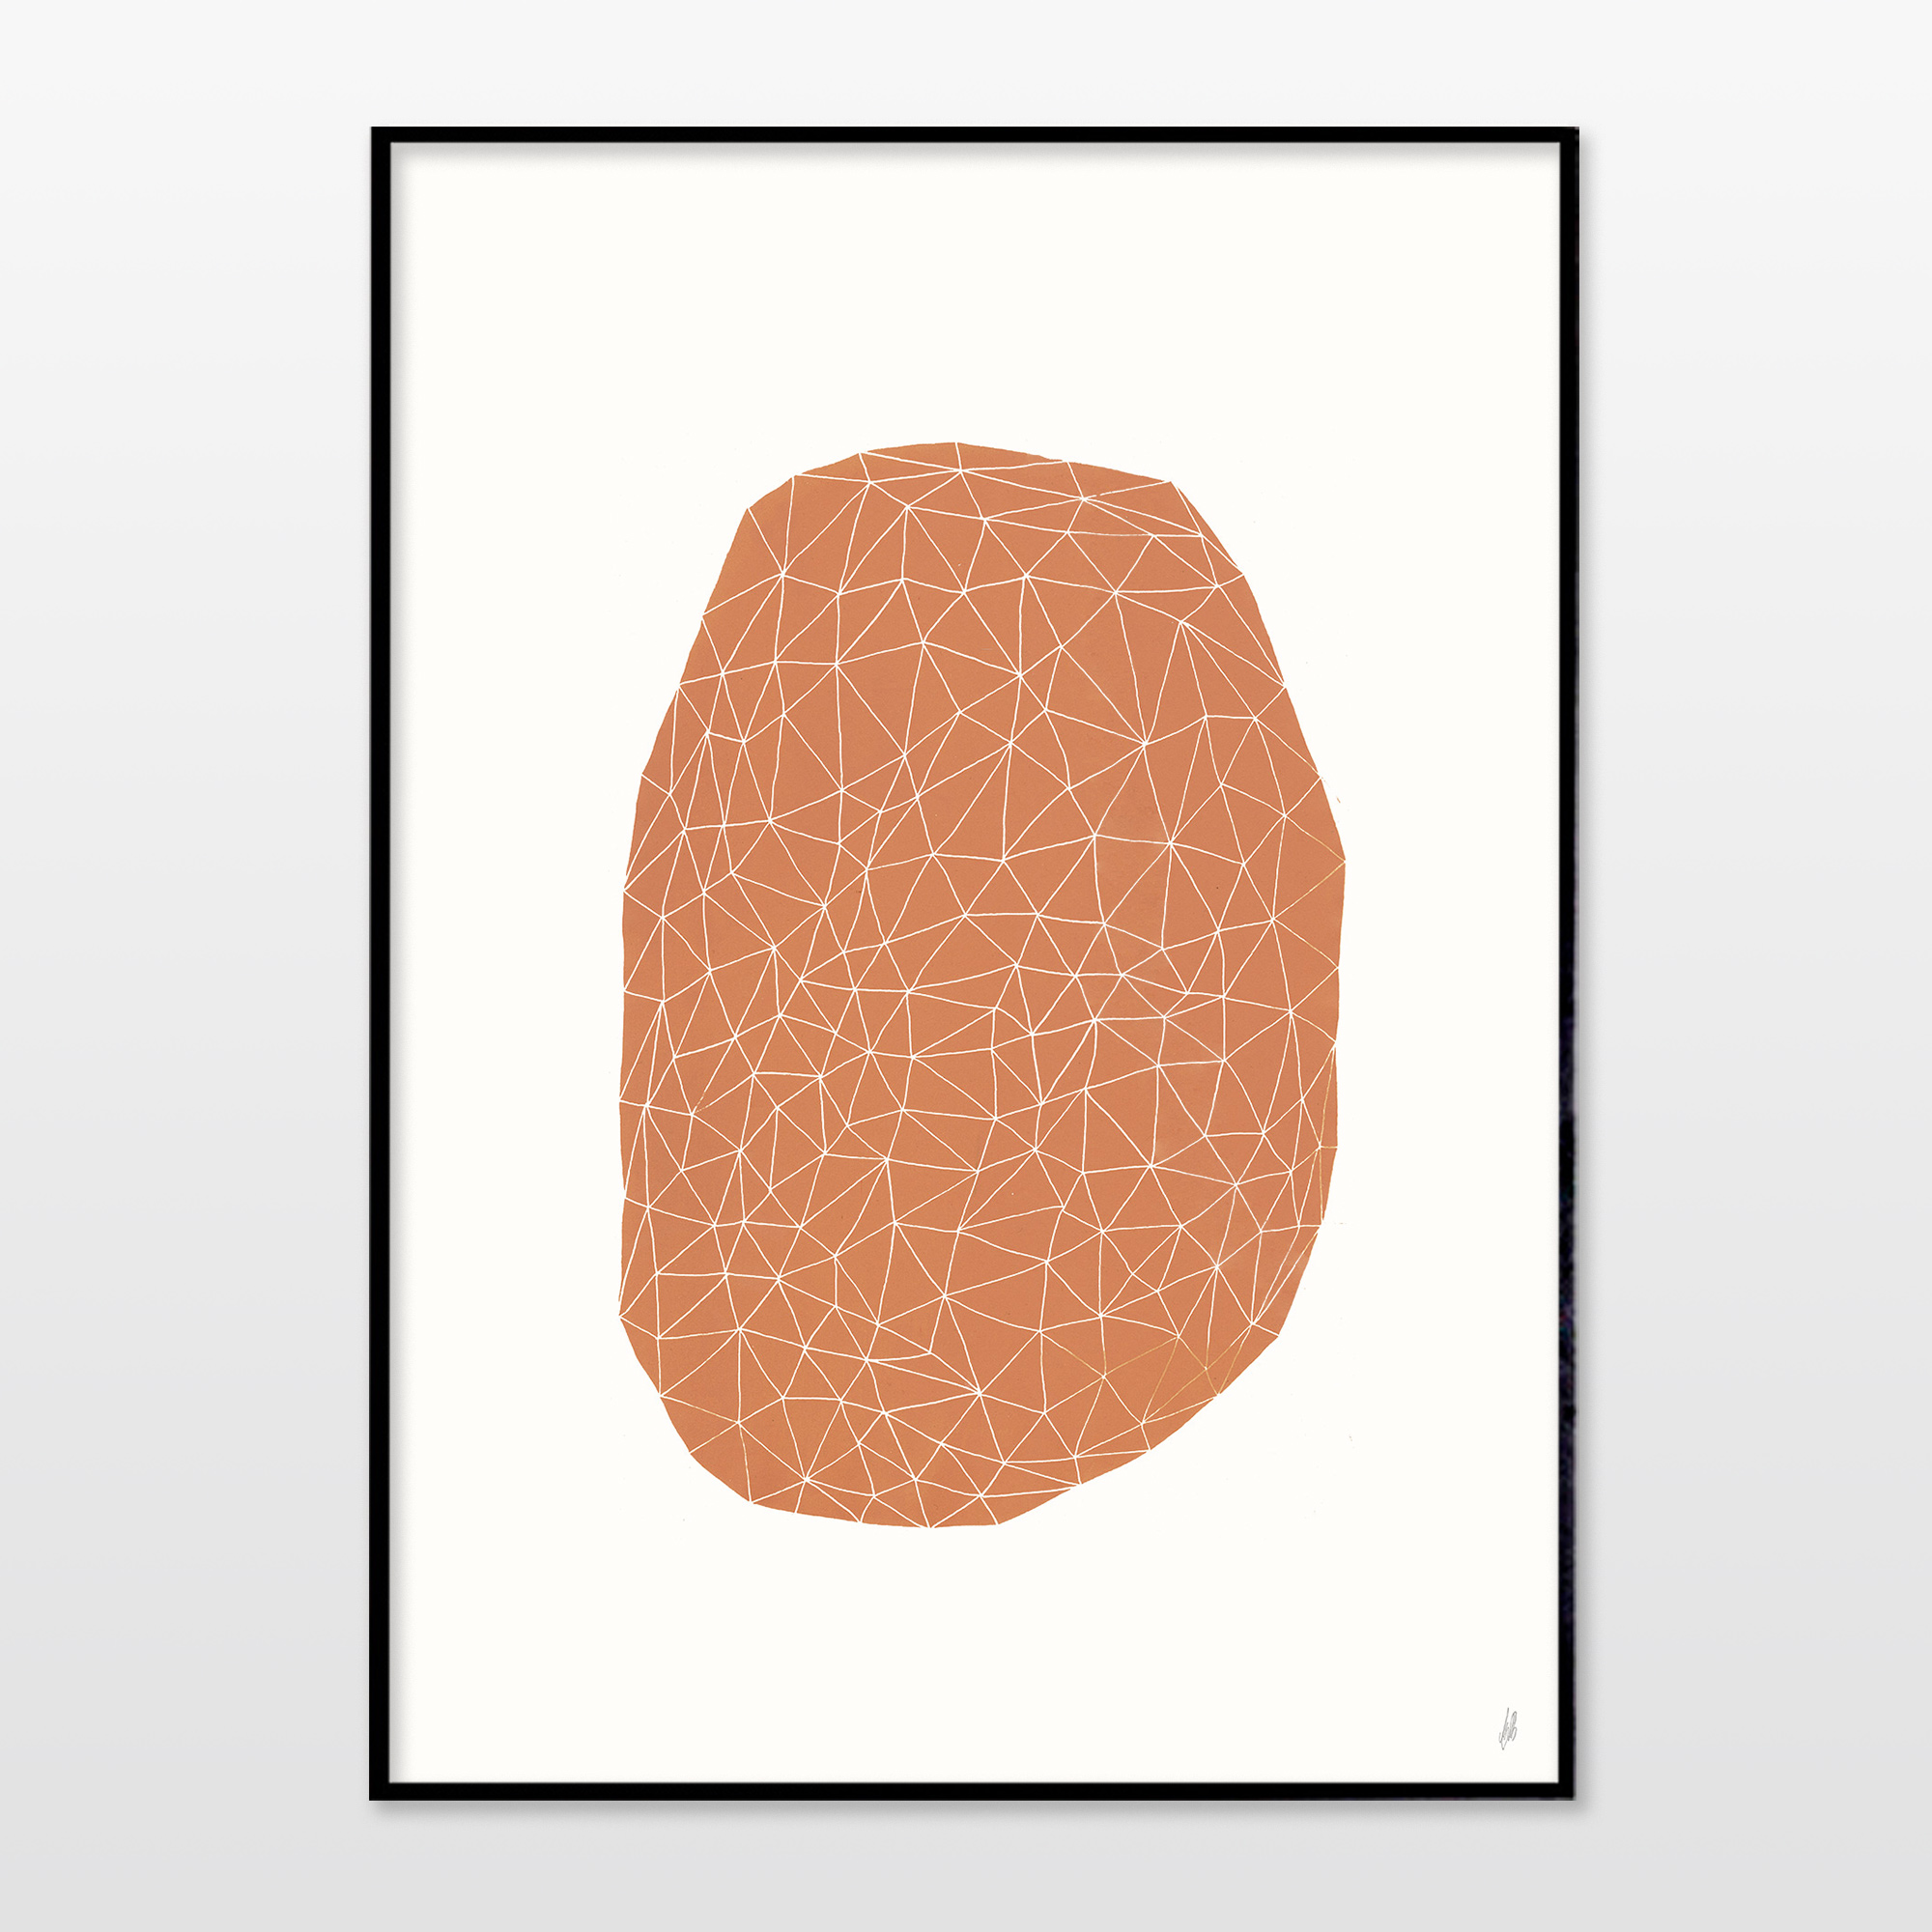 posters-prints, giclee-print, abstract, geometric, graphical, illustrative, minimalistic, architecture, patterns, beige, white, ink, paper, abstract-forms, architectural, contemporary-art, copenhagen, cubism, danish, decorative, design, interior, interior-design, modern, modern-art, nordic, posters, prints, scandinavien, Buy original high quality art. Paintings, drawings, limited edition prints & posters by talented artists.